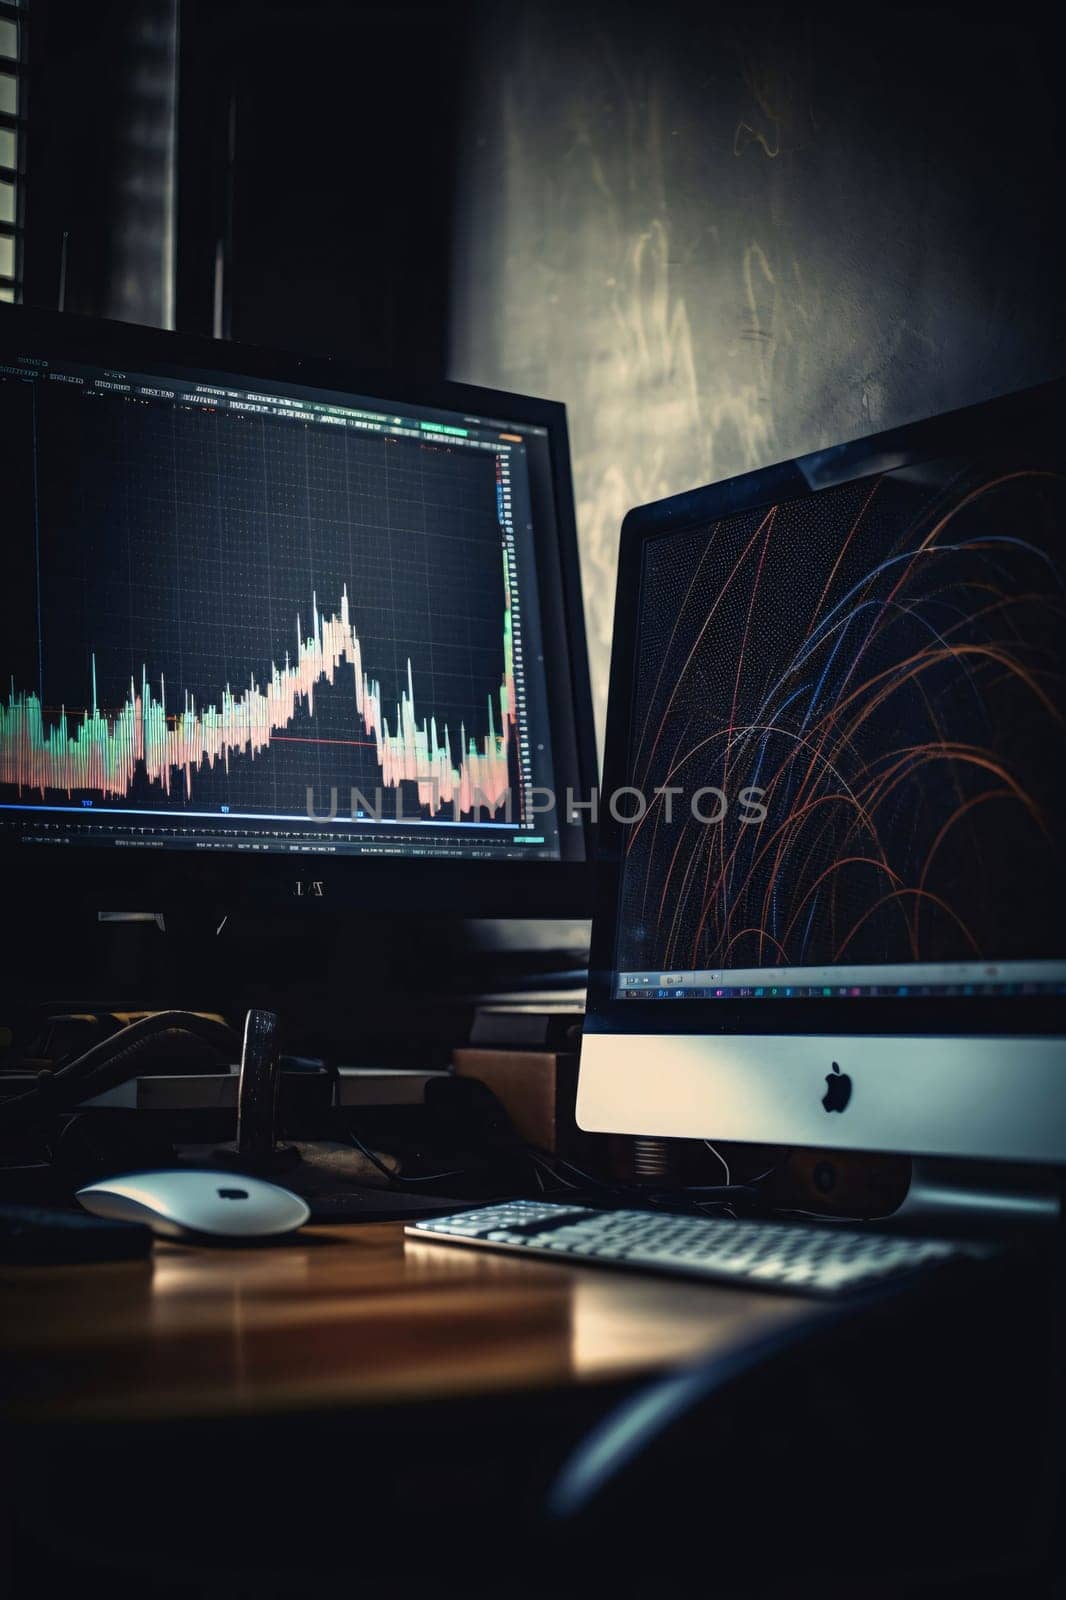 Stock Market: Computer monitors with stock market data on the screen, stock trading concept